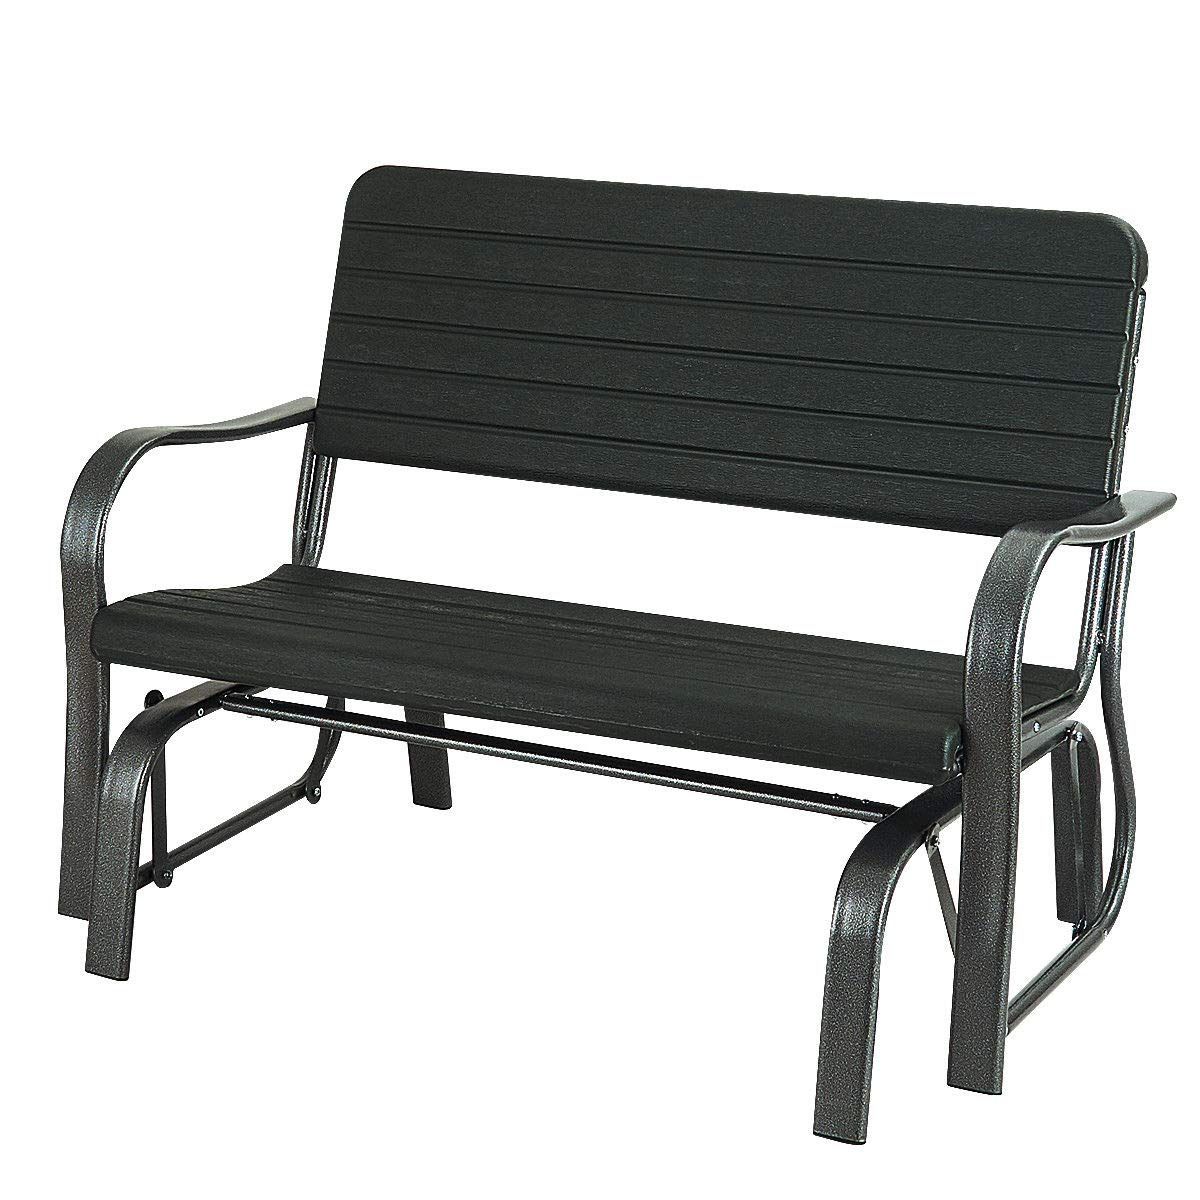 Popular Black Steel Patio Swing Glider Benches Powder Coated Inside Amazon: Pnpglobal Outdoor Patio Swing Porch Rocker (View 27 of 30)